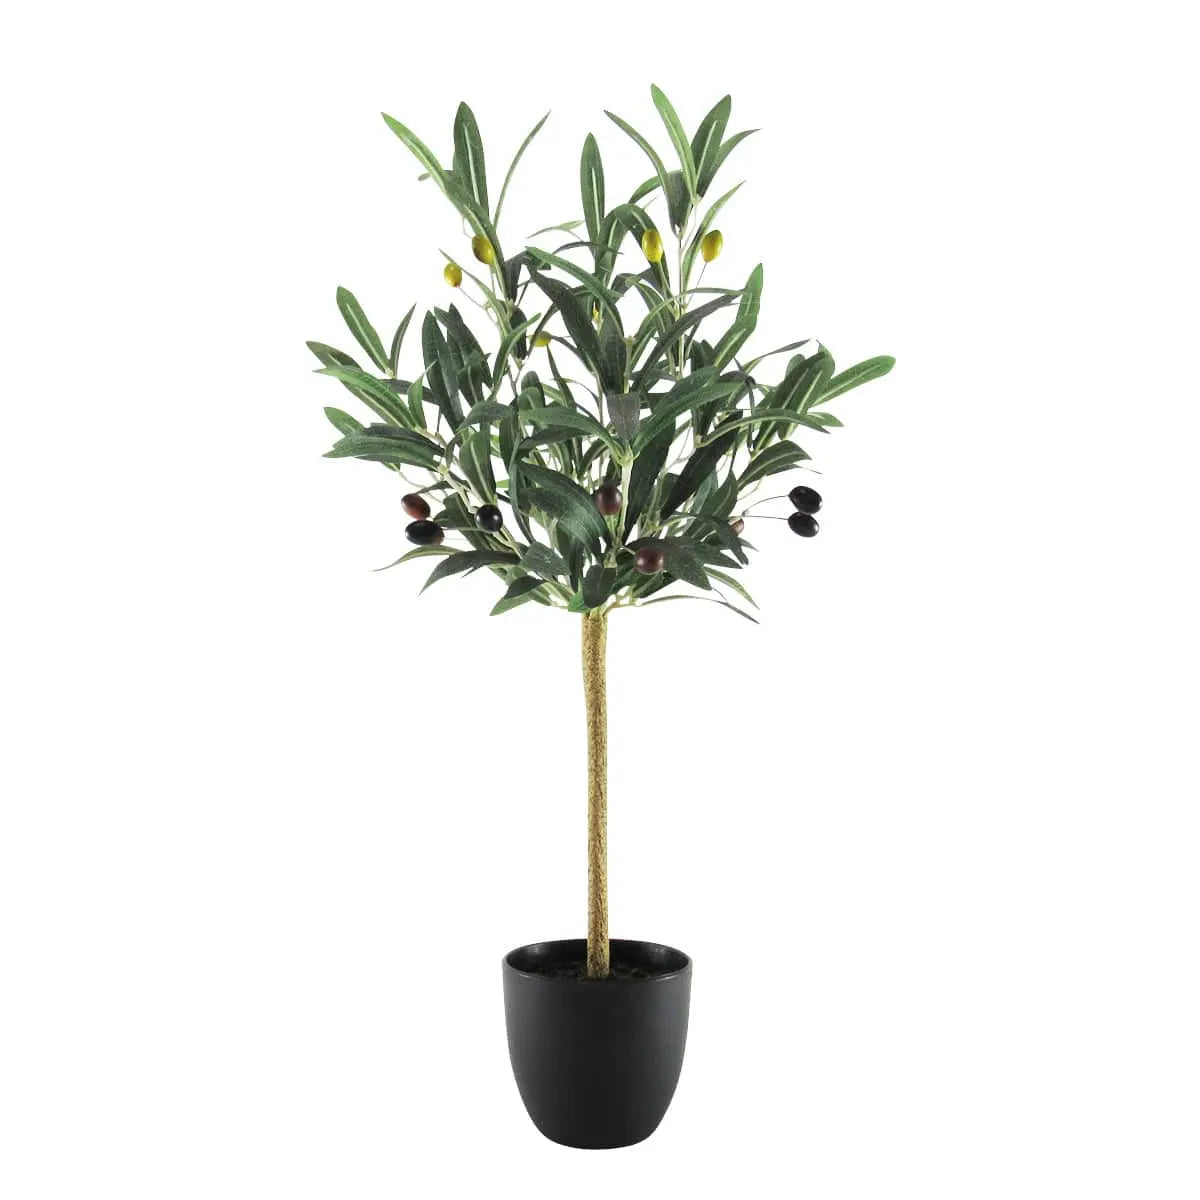 24 inch Mini Olive Tree Potted w Black and Green Olives Silk Plants Canada